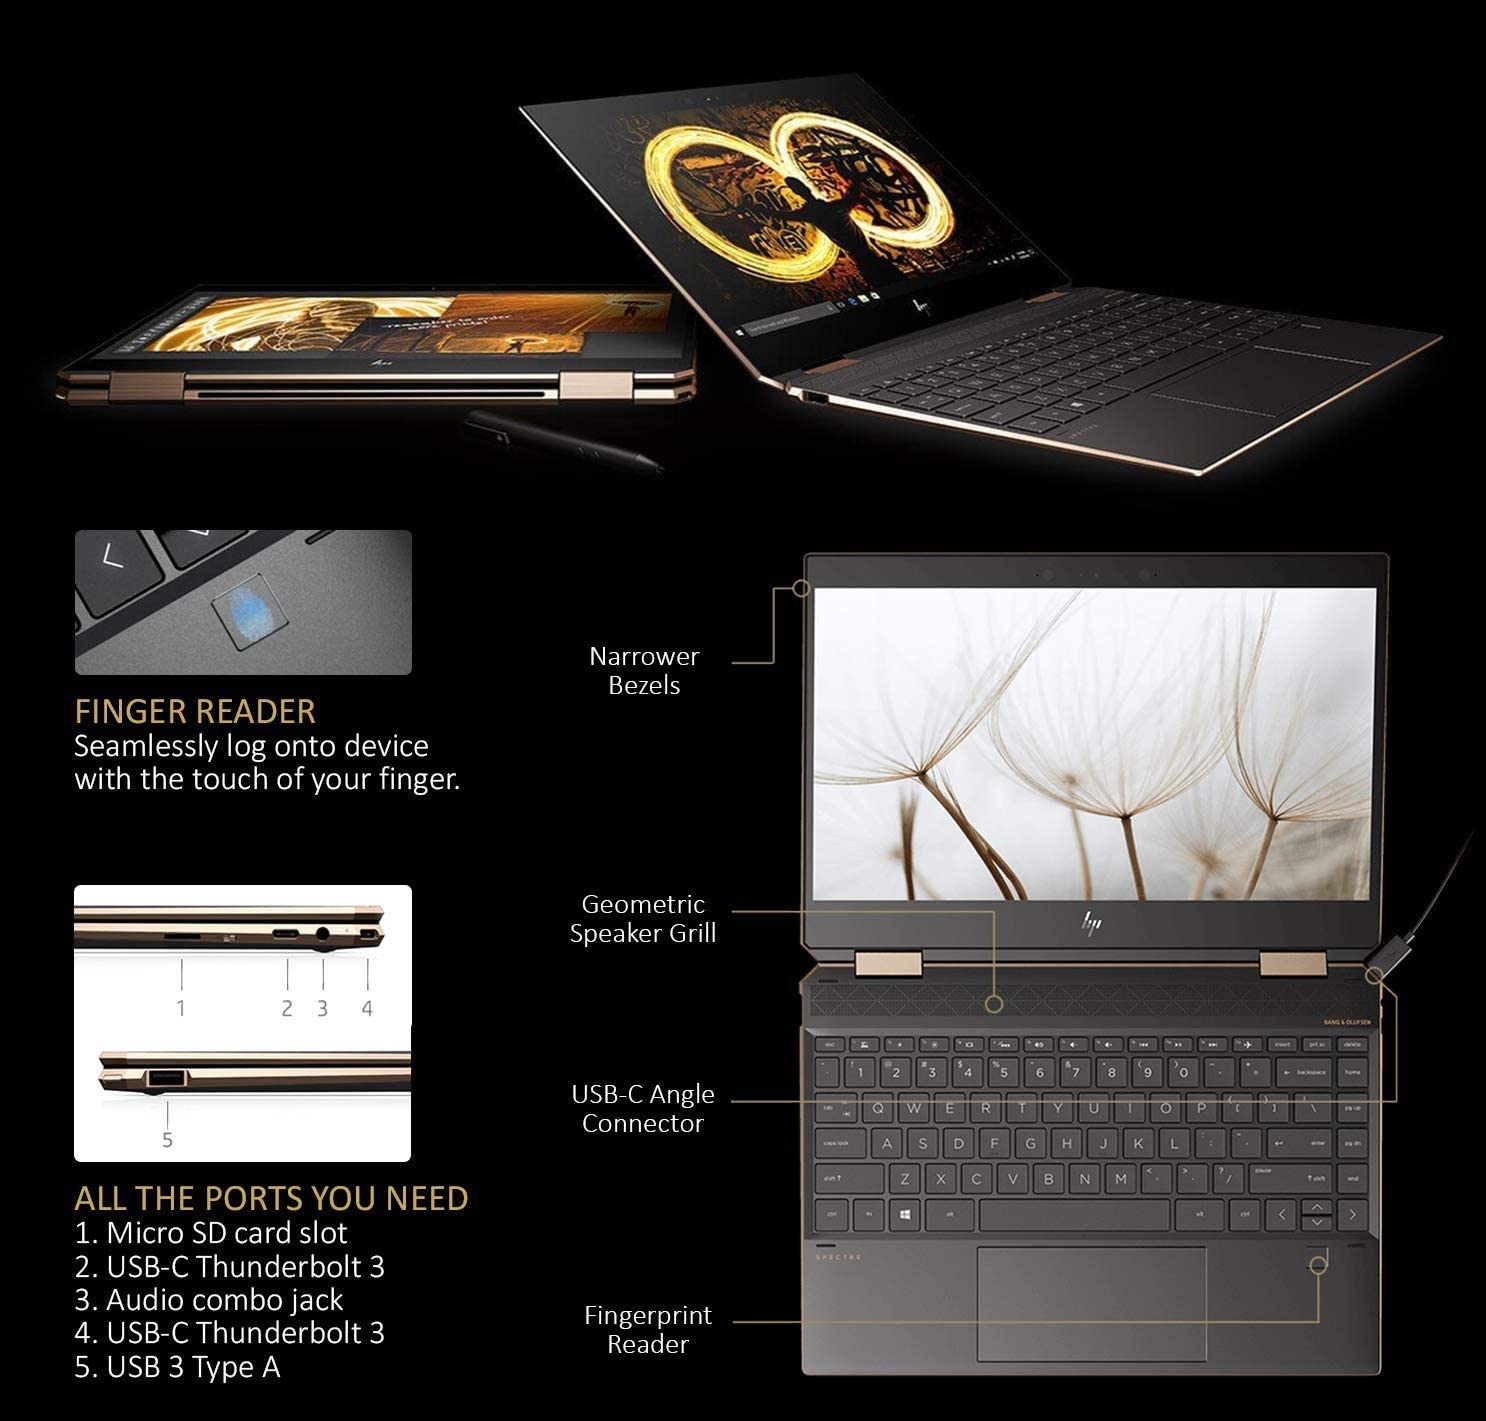 Newest HP Spectre x360 15t Touch AMOLED specifications